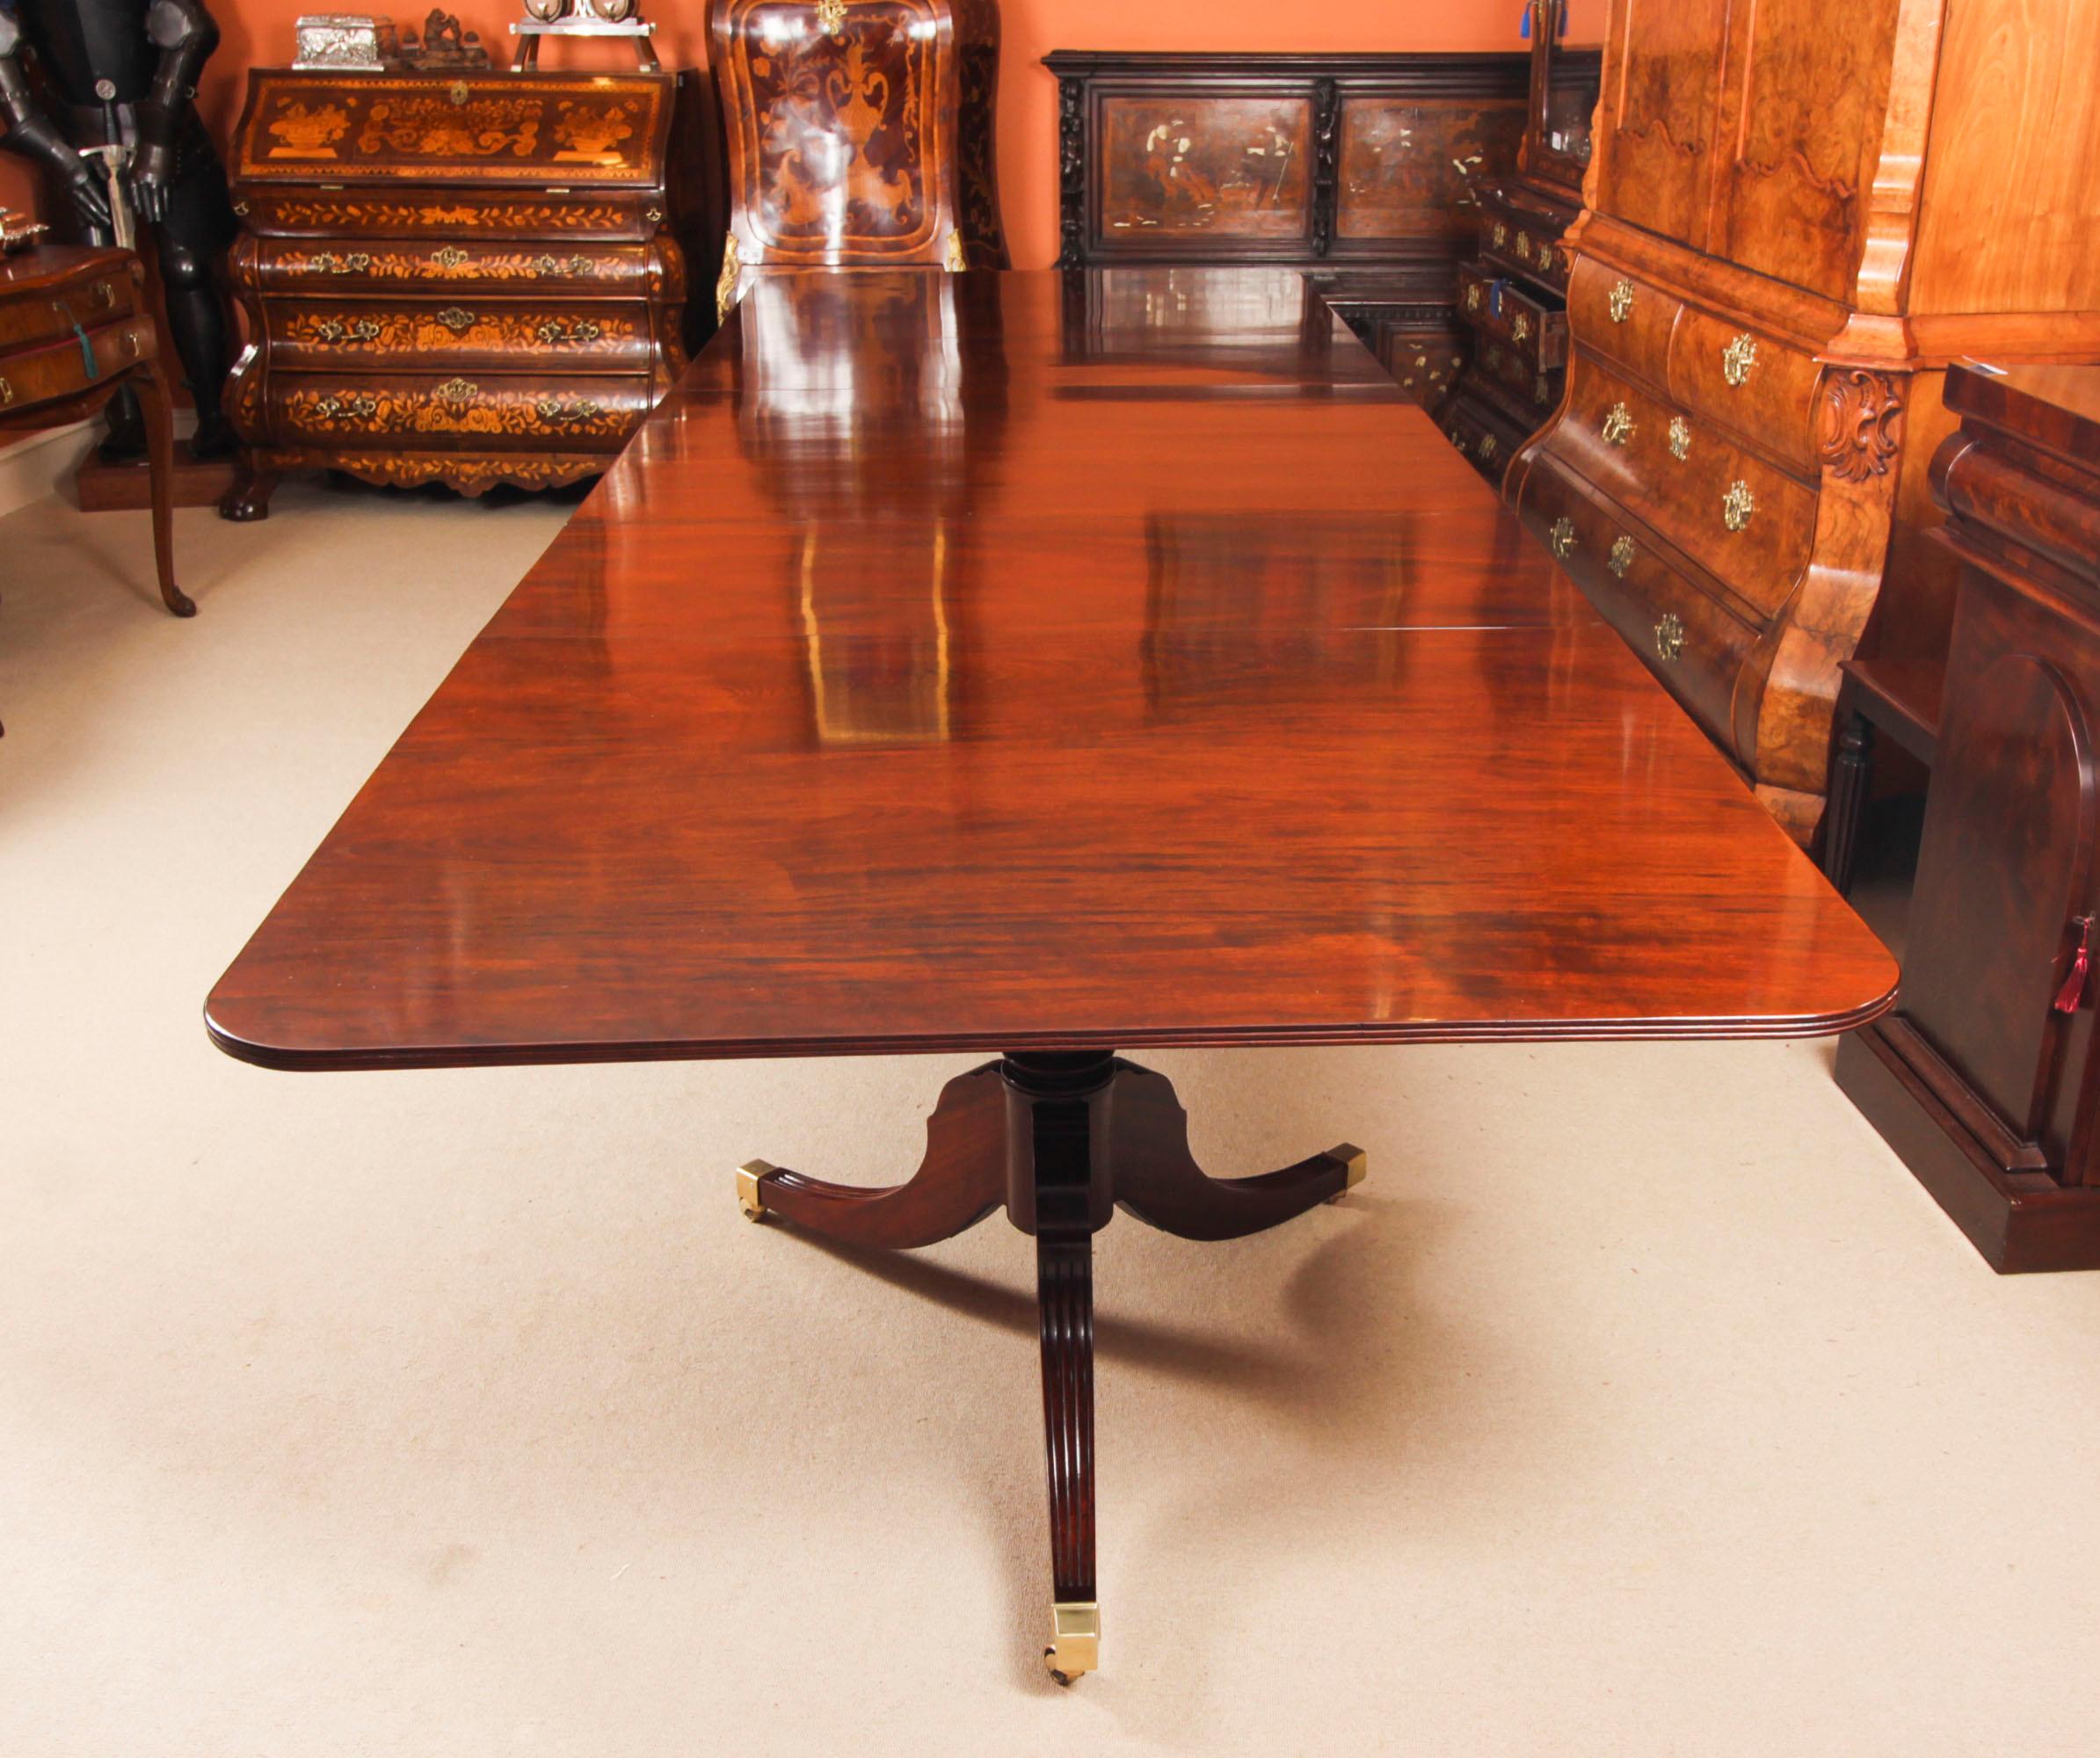 Antique 14ft Regency Revival Triple Pillar Dining Table & 14 Chairs 19th Century For Sale 5